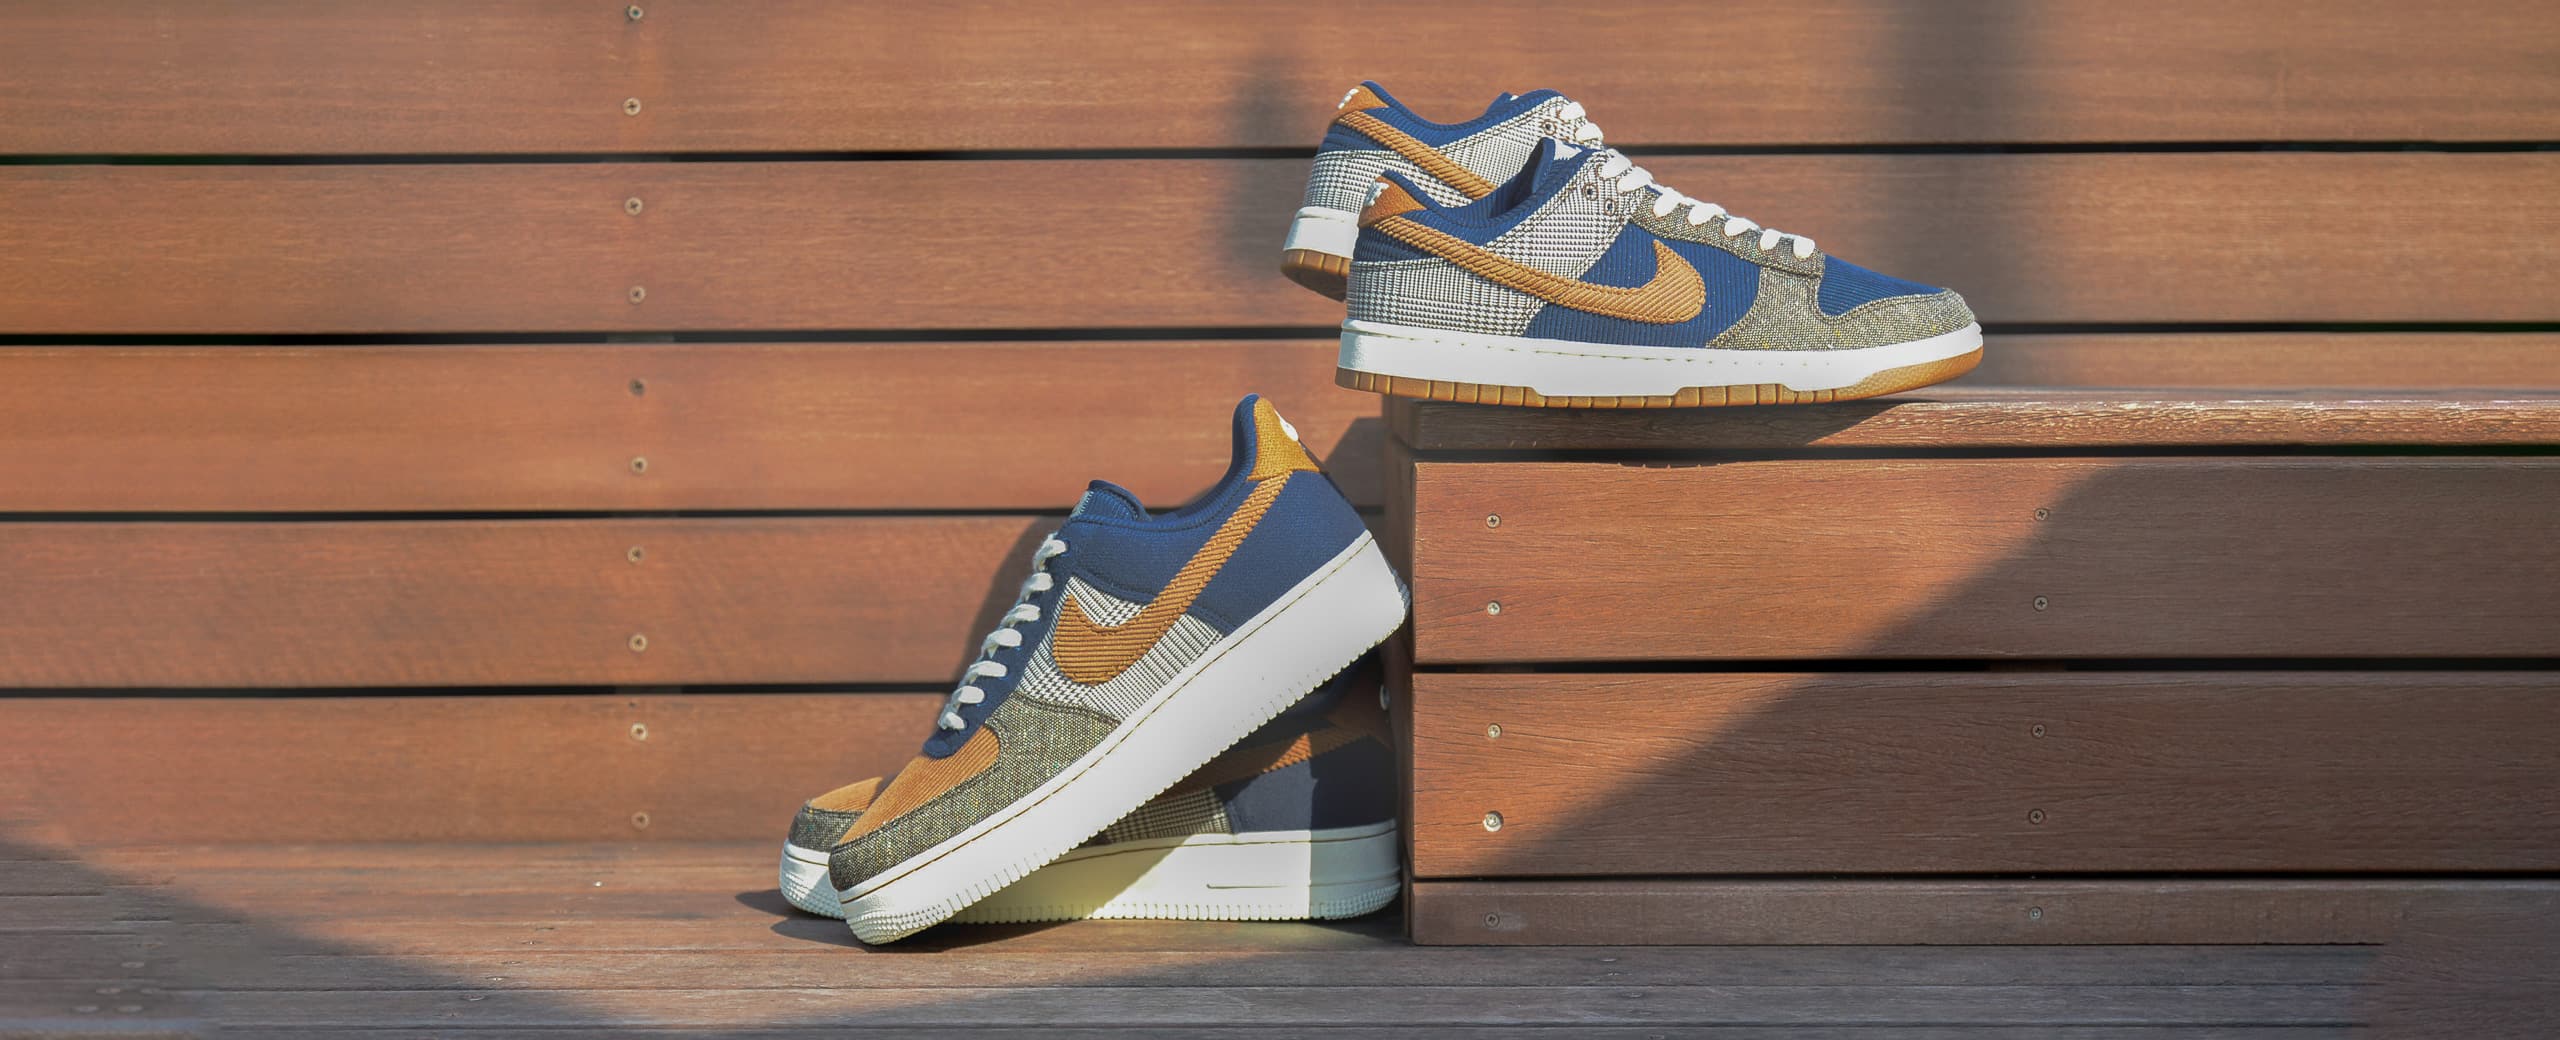 NIKE AIR FORCE 1 '07 PRM MIDNIGHT NAVY/ALE BROWN-PALE IVORY